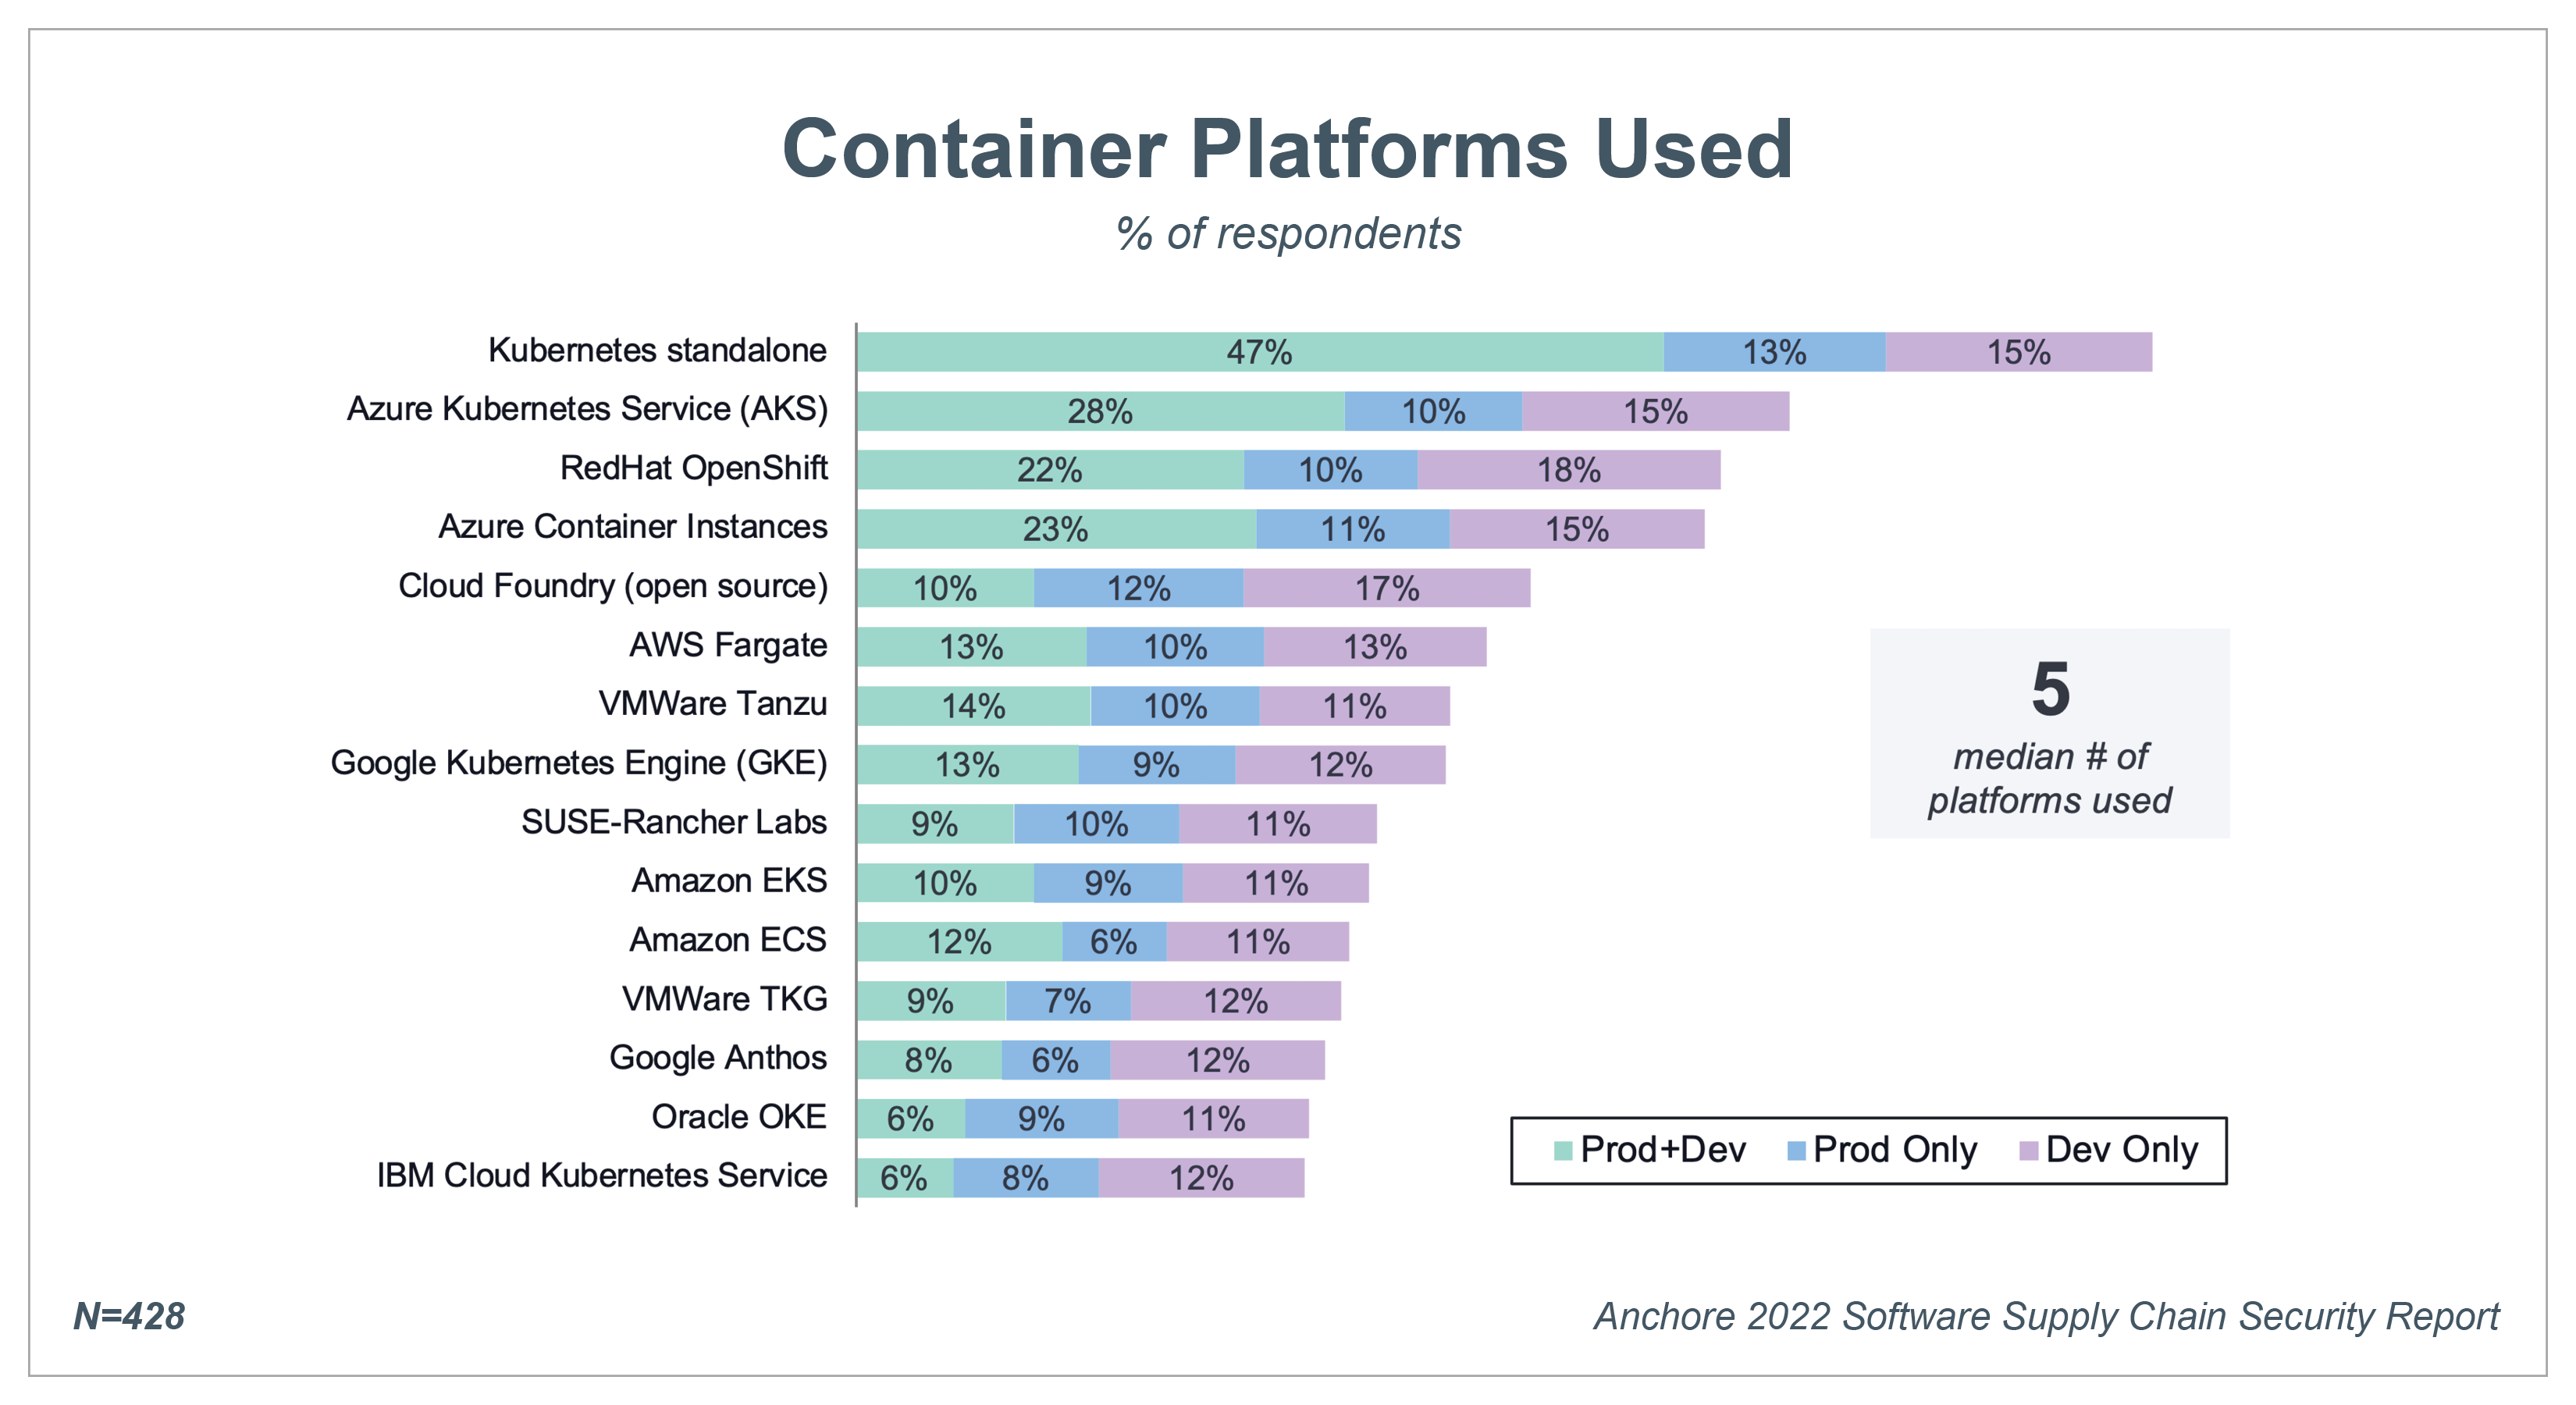 Bar chart showing types of container platforms used by enterprises